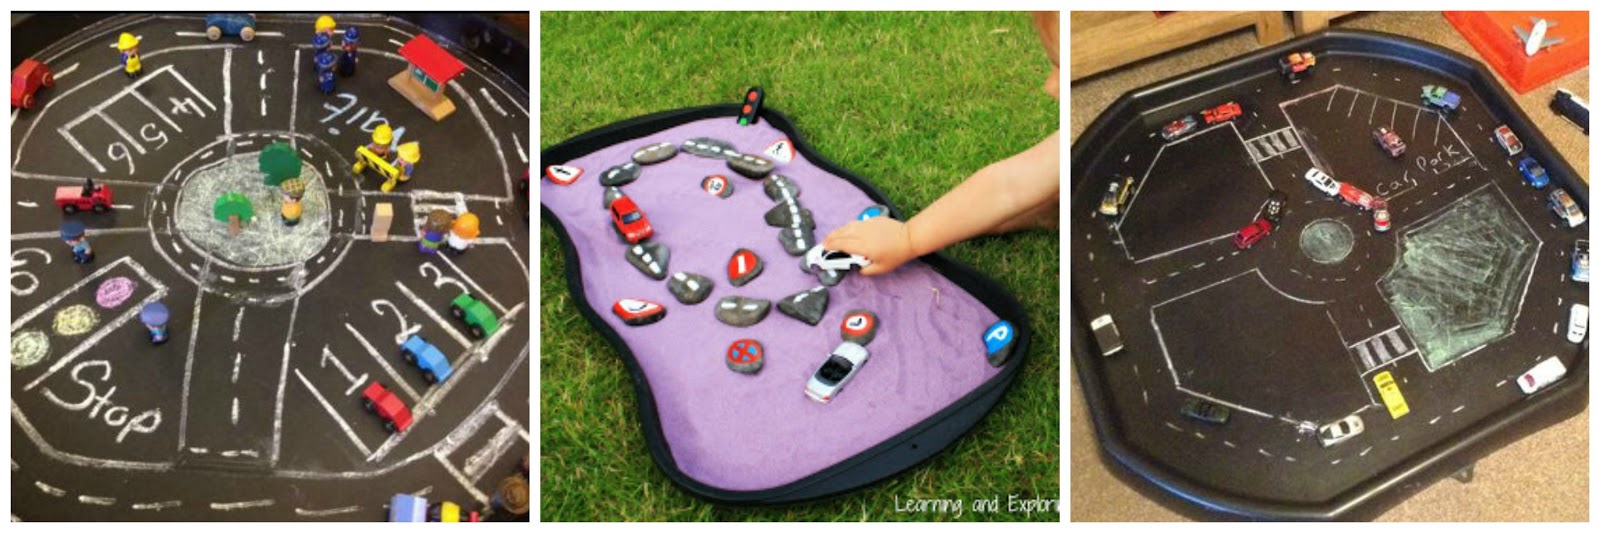 20 Tuff Tray Play Ideas and How They Can Help with Children's